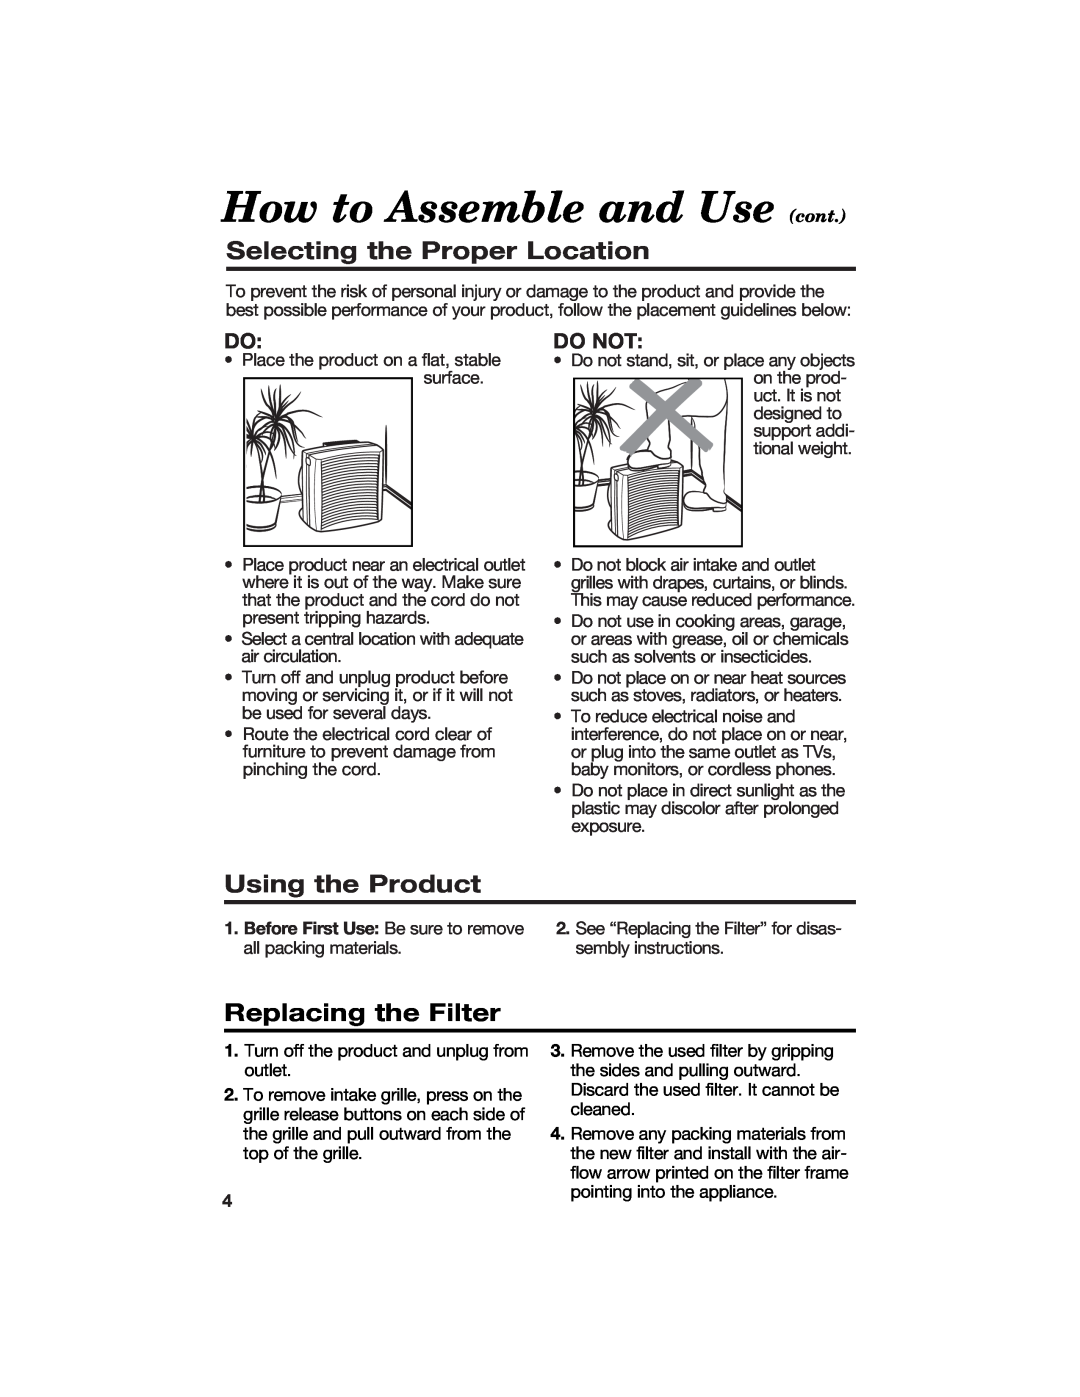 Hamilton Beach 840133100 manual How to Assemble and Use cont, Selecting the Proper Location, Using the Product, Do Not 